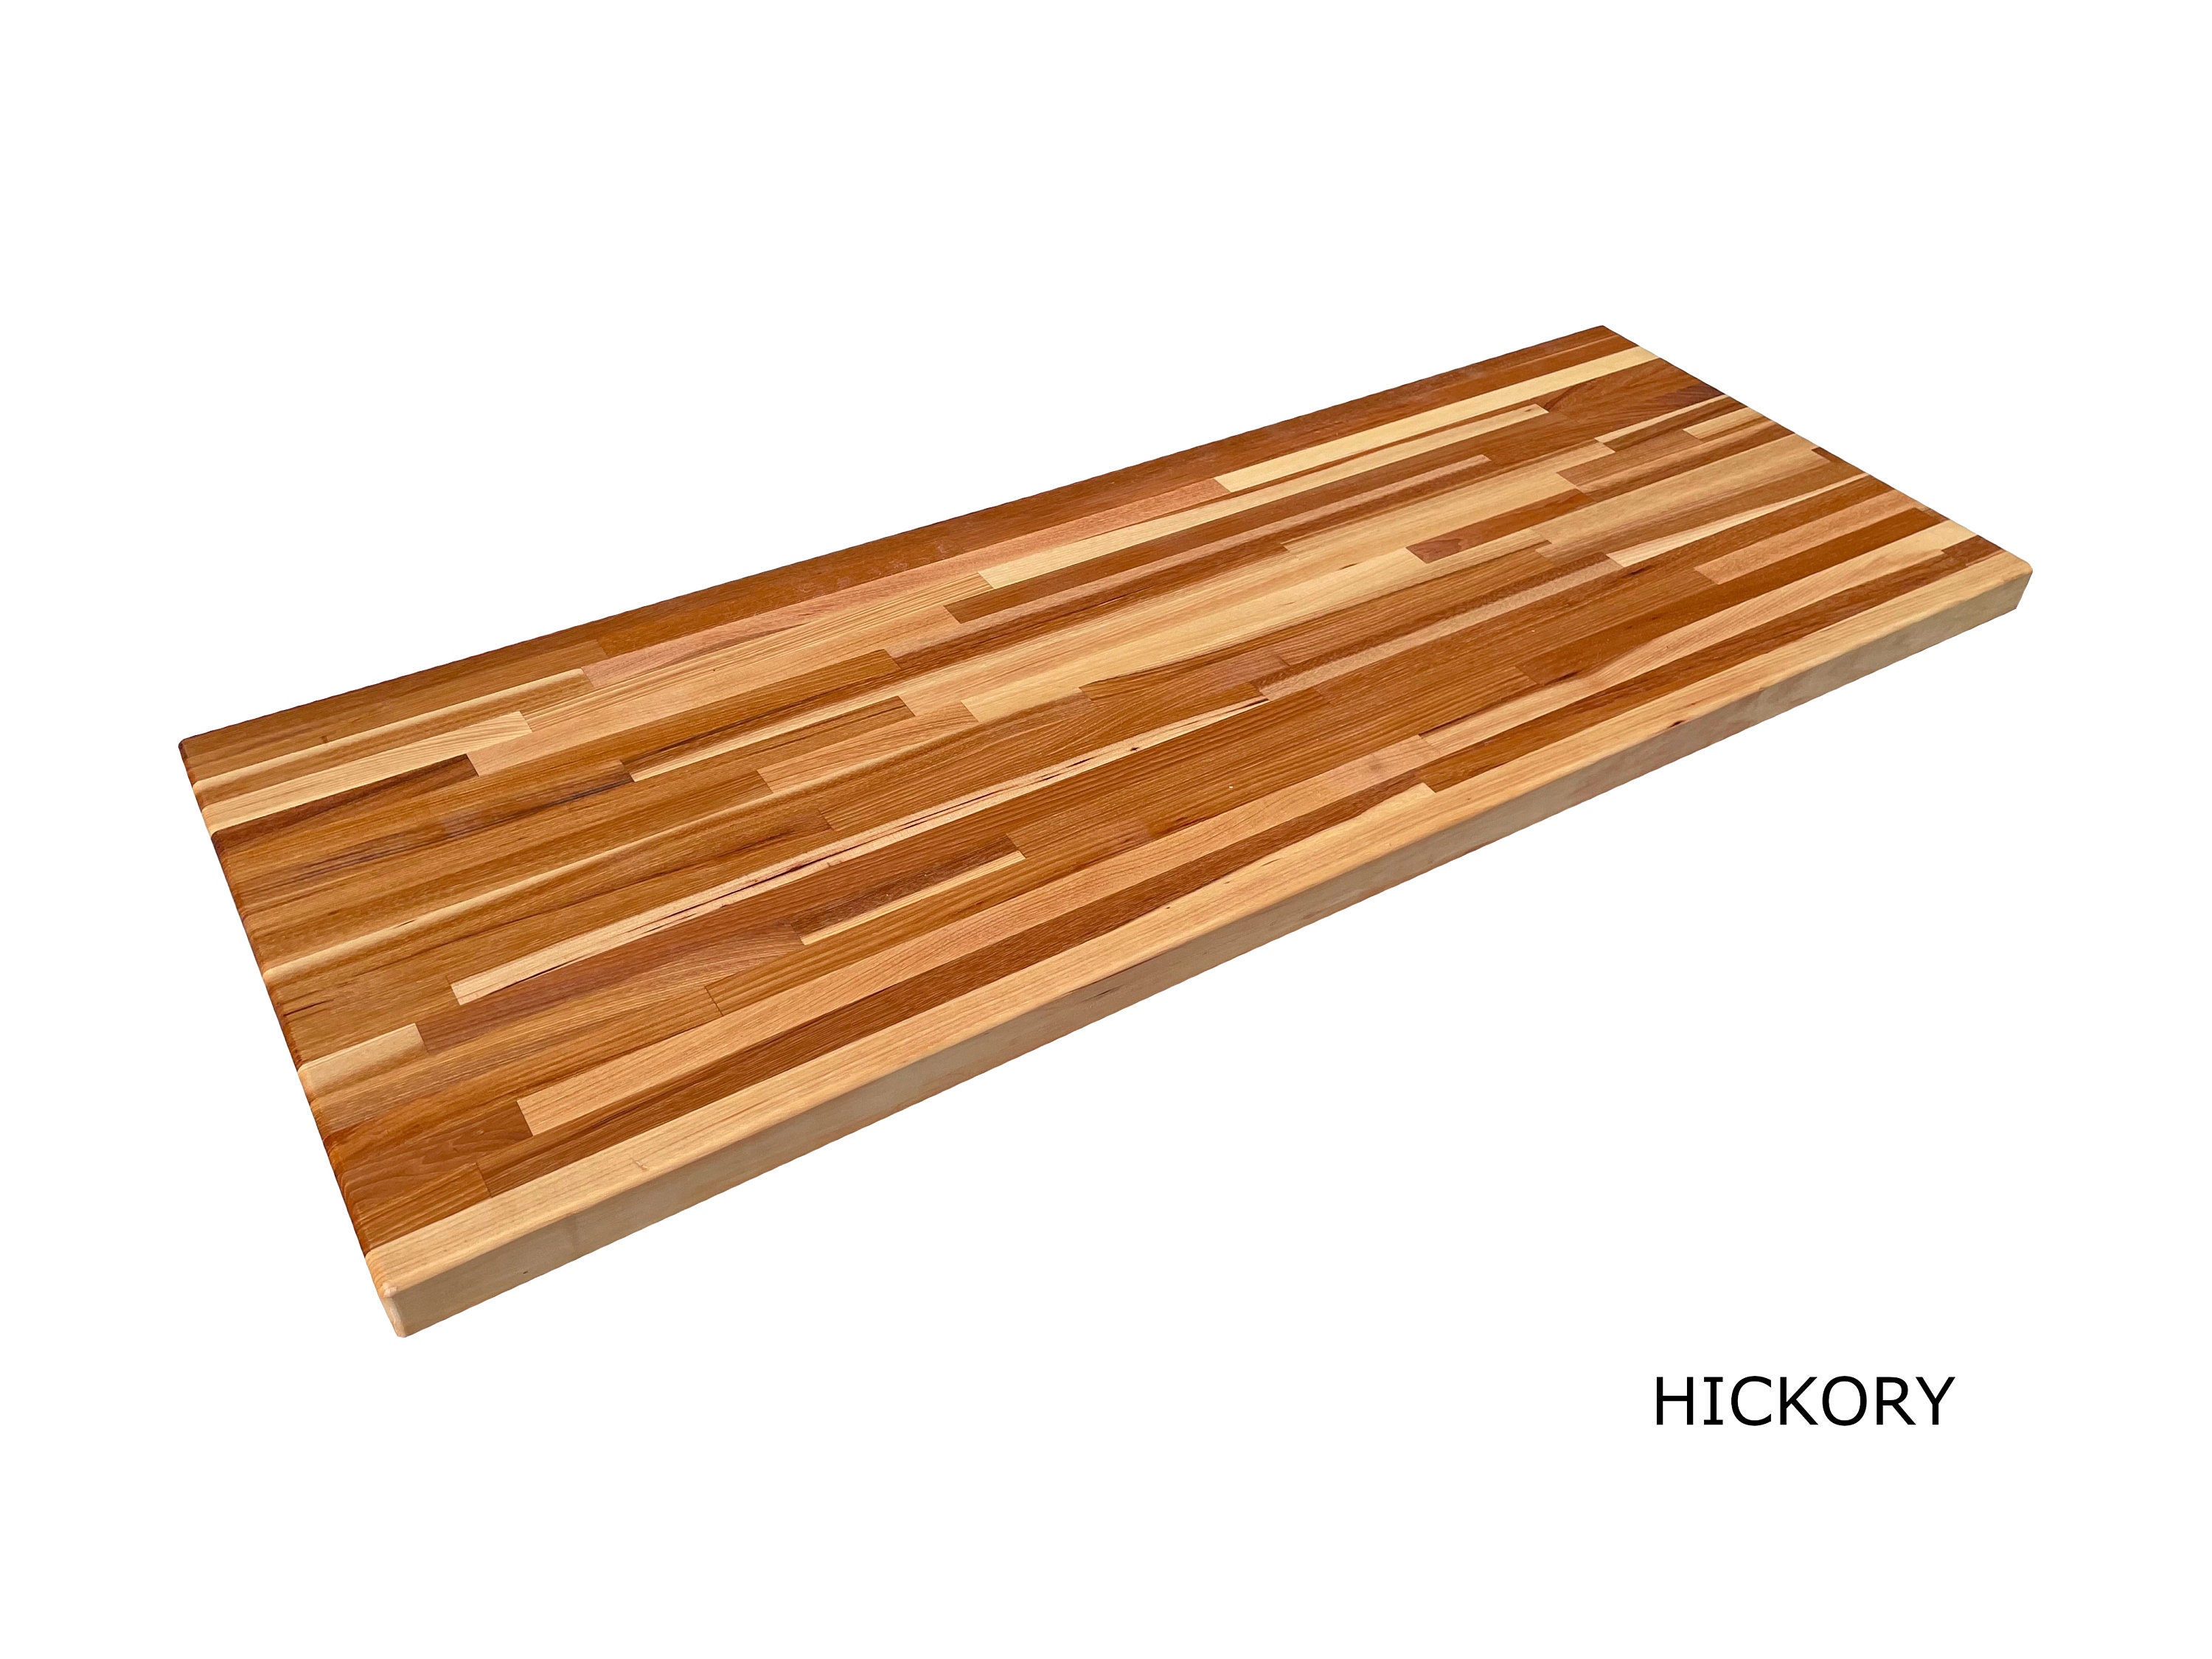 This Beautiful Wooden Corner Cutting Board Attaches Securely To The Corner  Of Your Counter